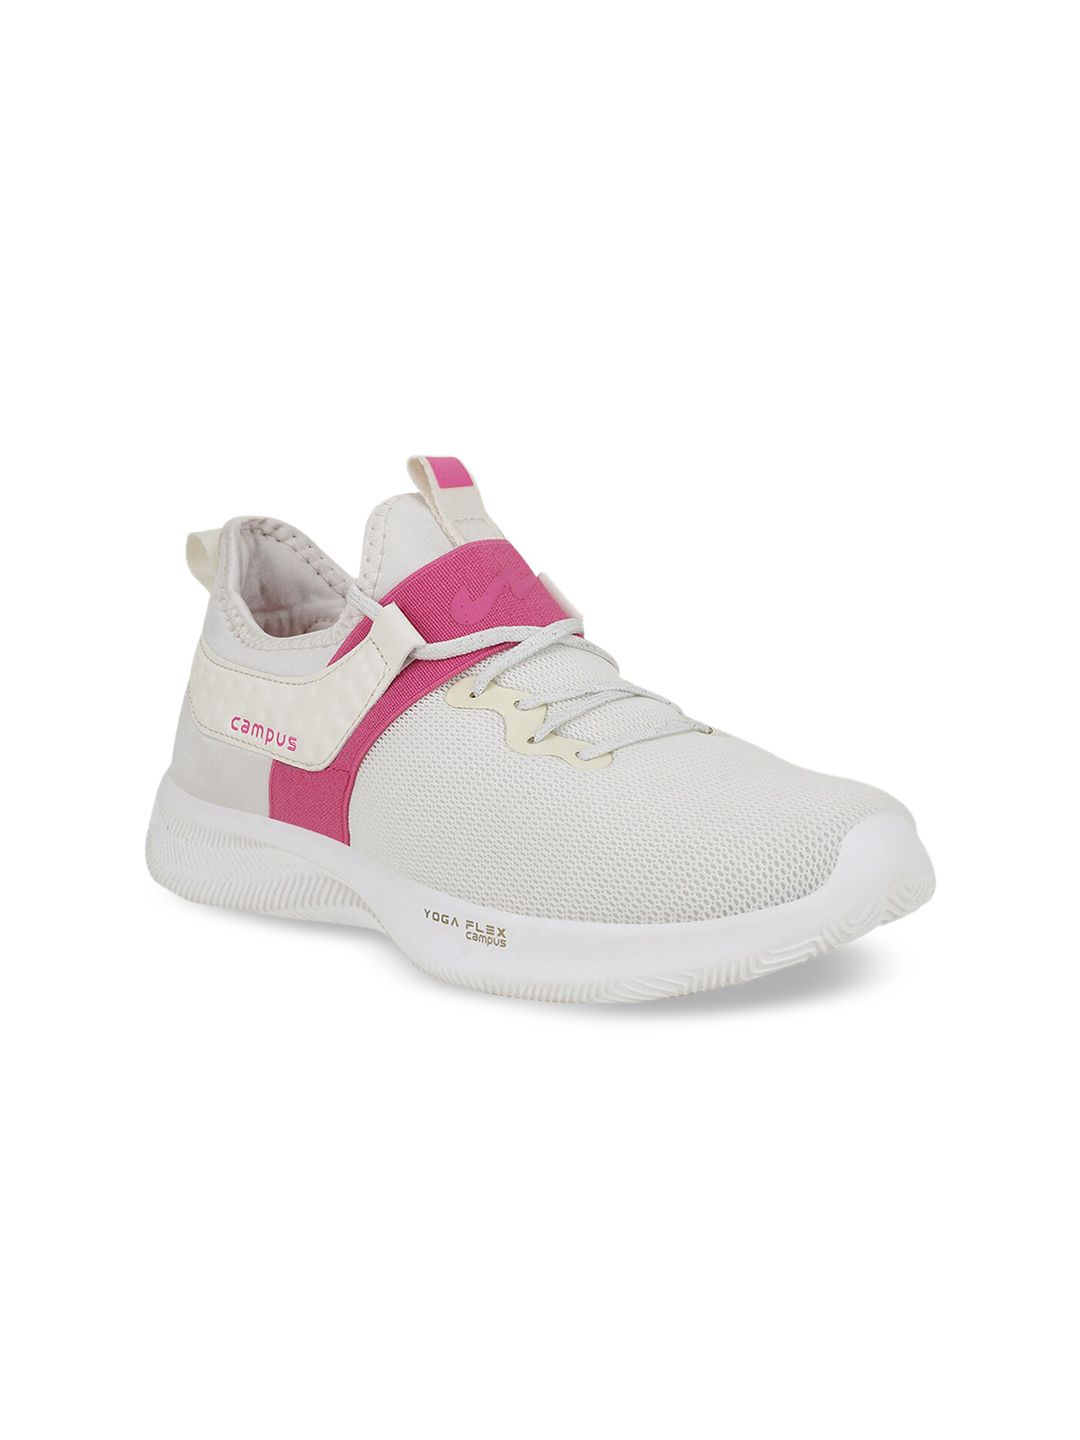 Campus Women Off-White Mesh Mid-Top Running Shoes Price in India